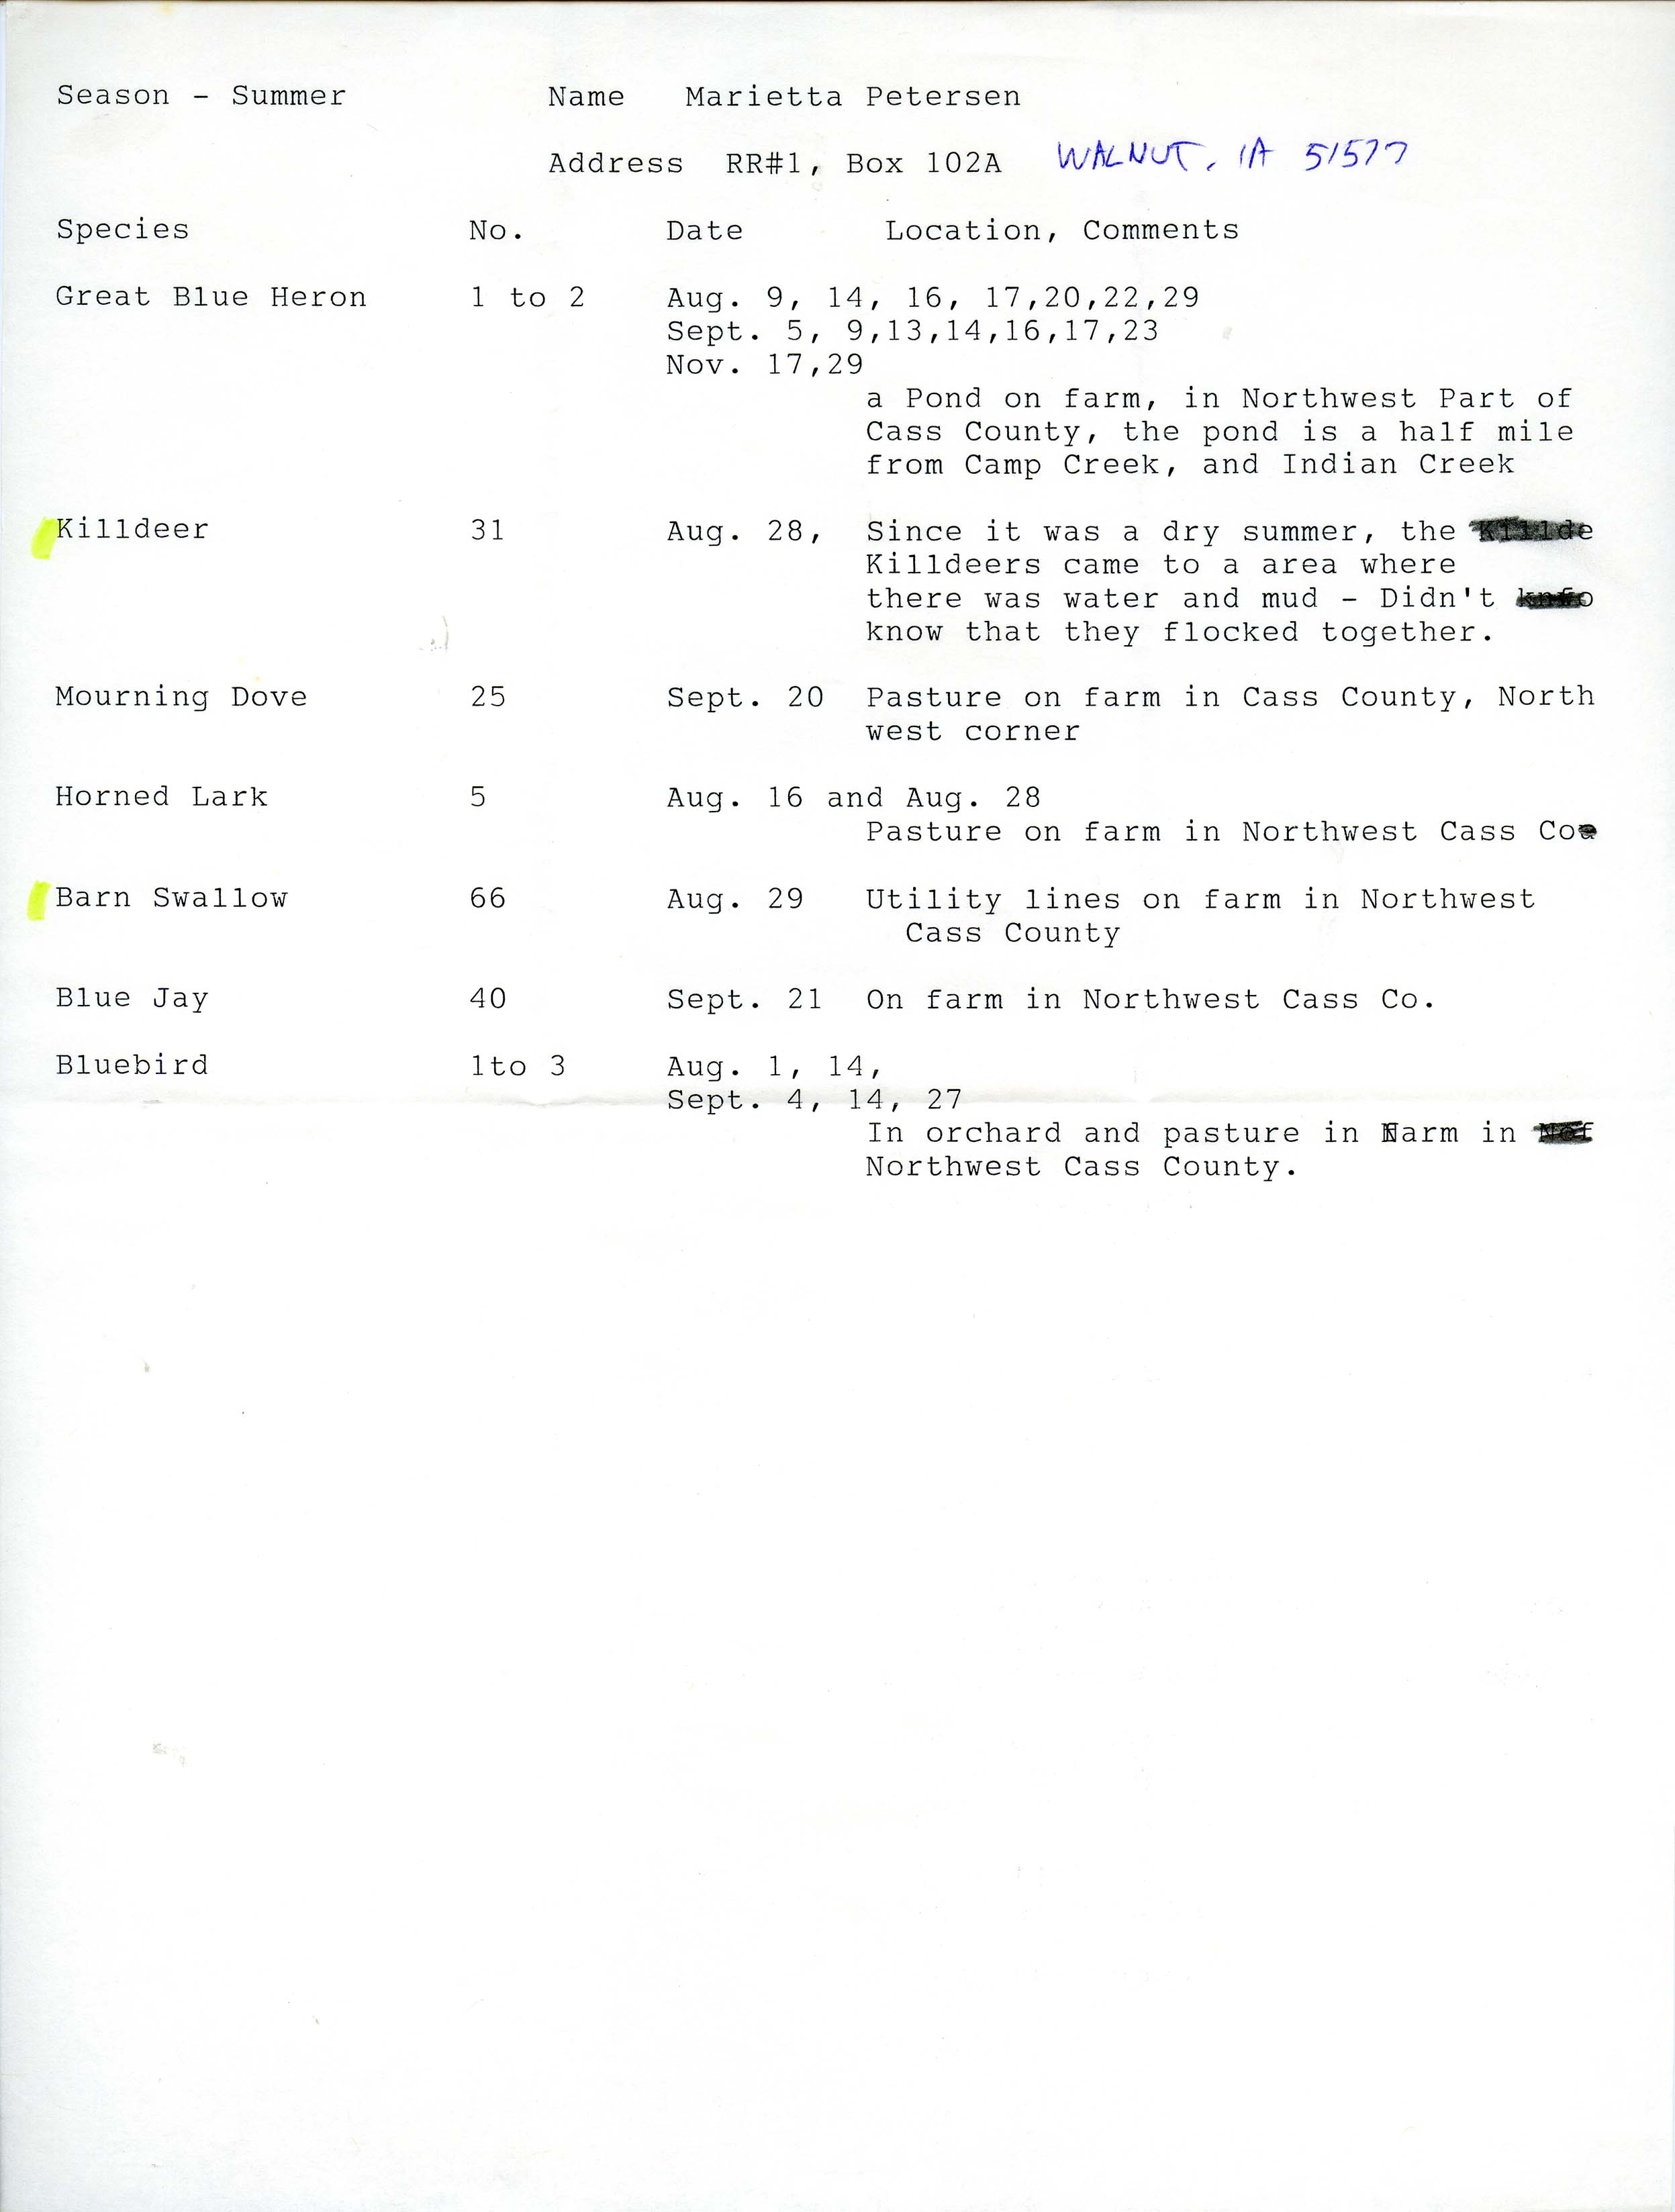 Field notes contributed by Marietta Petersen, fall 1988